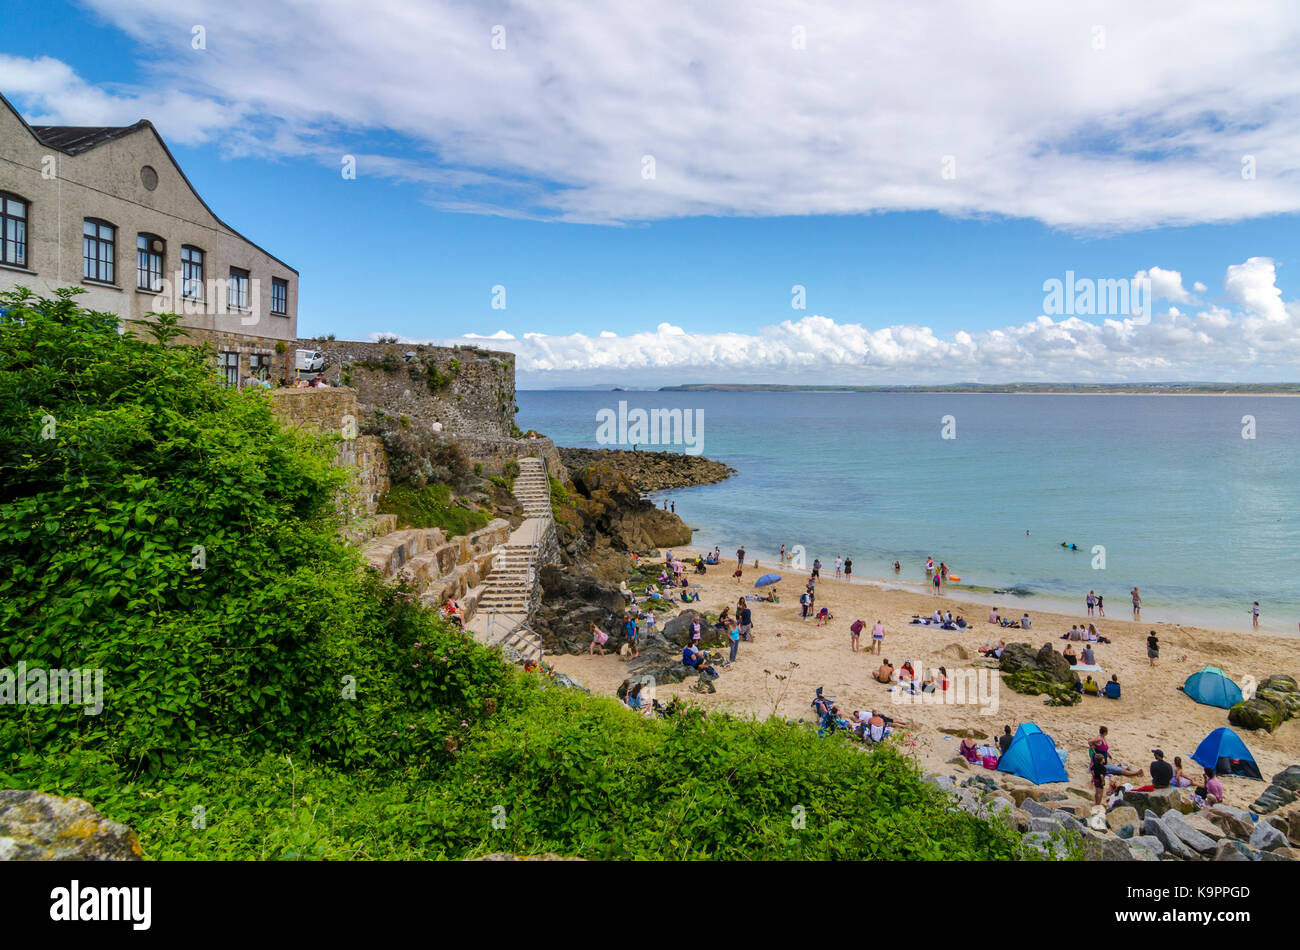 Looking down onto Bamaluz Beach busy with people, St Ives, Cornwall, Stock Photo